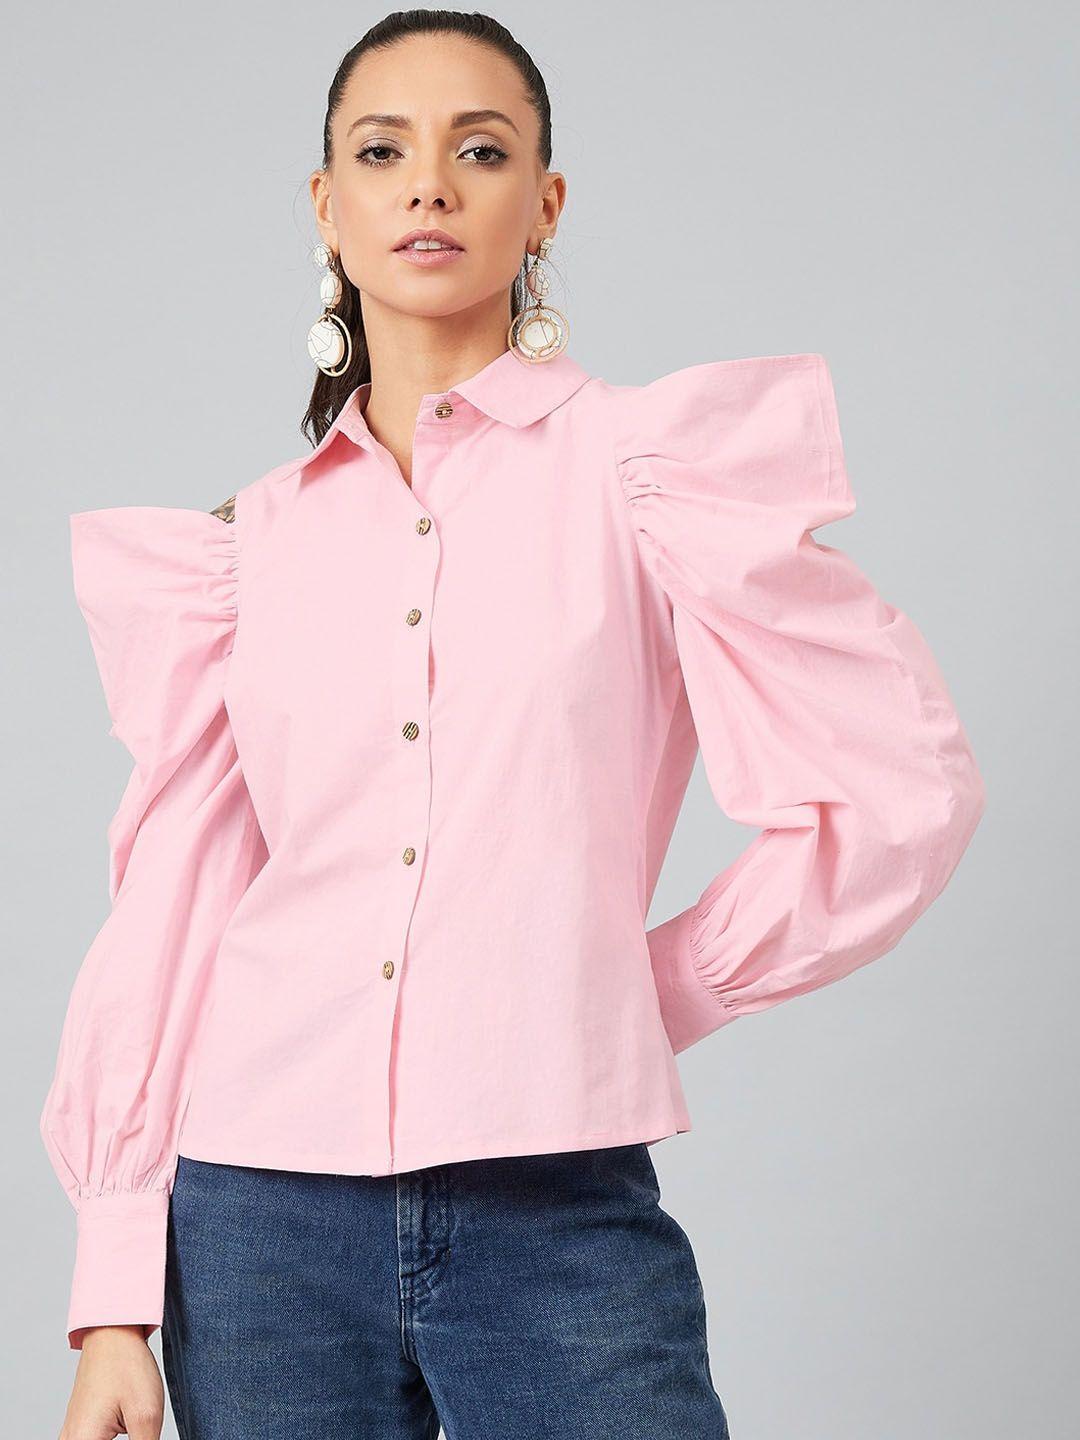 athena women pink solid shirt style top